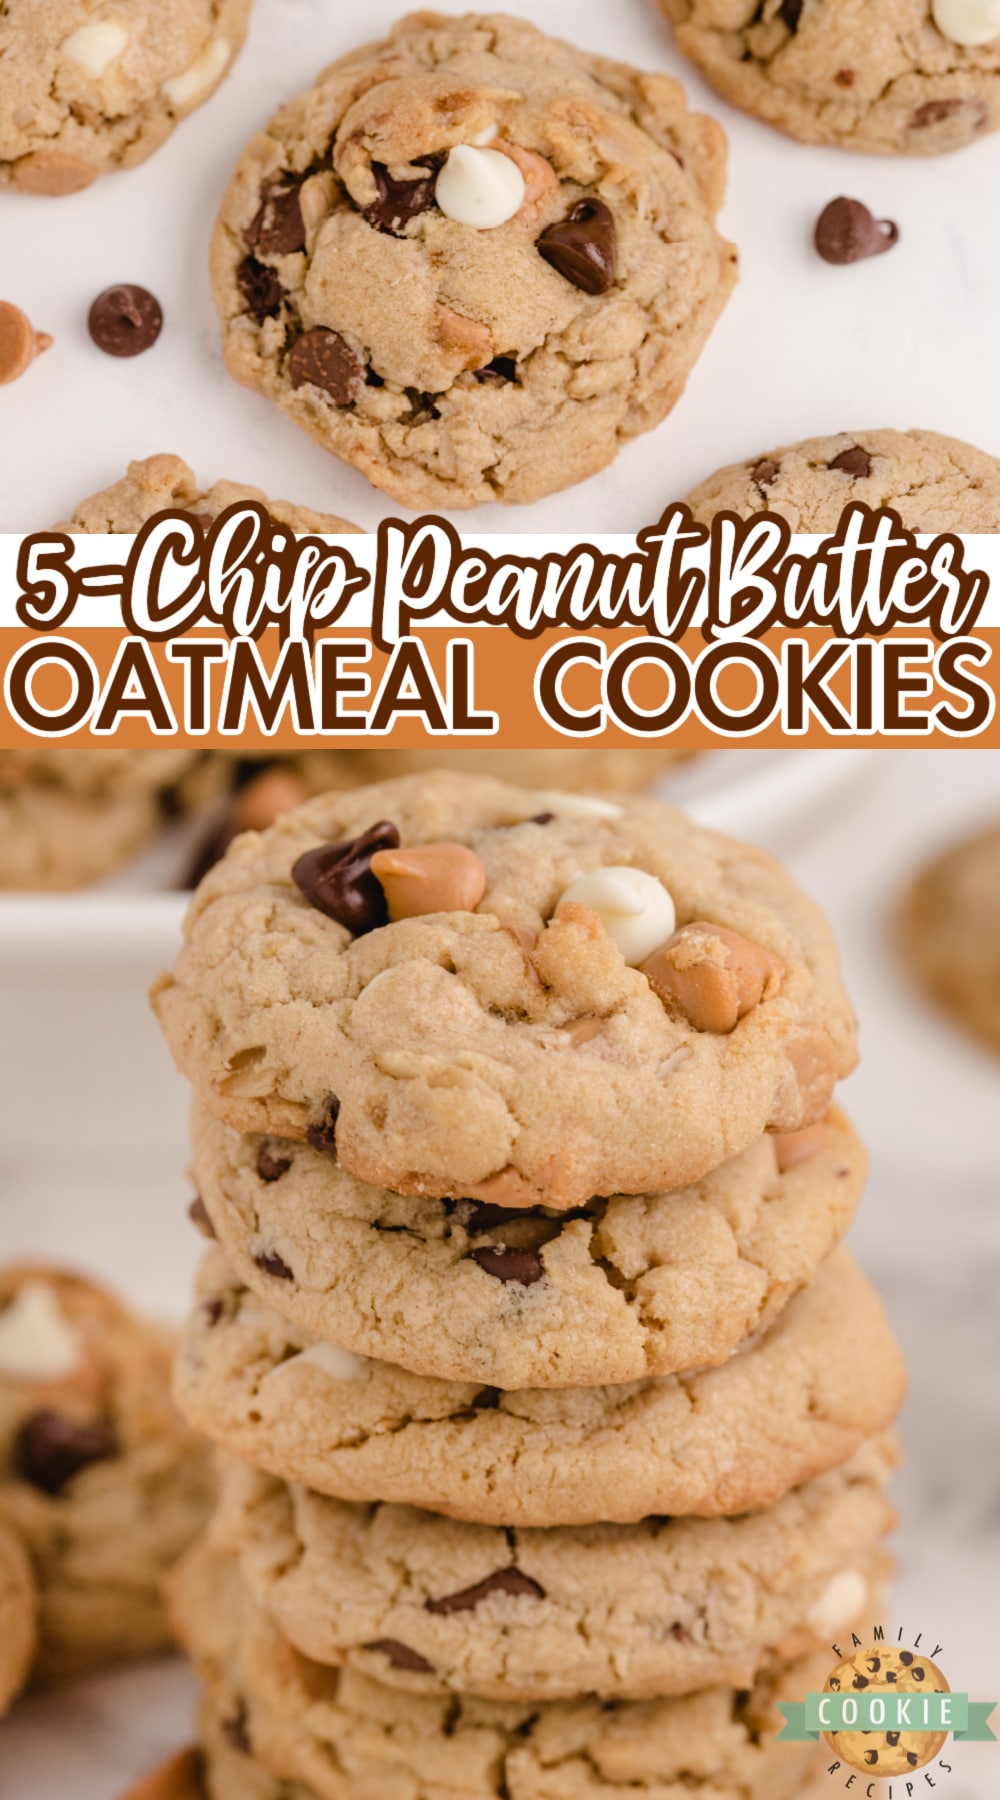 Five Chip Peanut Butter Oatmeal Cookies are soft, chewy and filled with five different kinds of baking chips! Milk chocolate, semisweet chocolate, peanut butter, vanilla and butterscotch chips make these oatmeal peanut butter cookies absolutely amazing! via @buttergirls